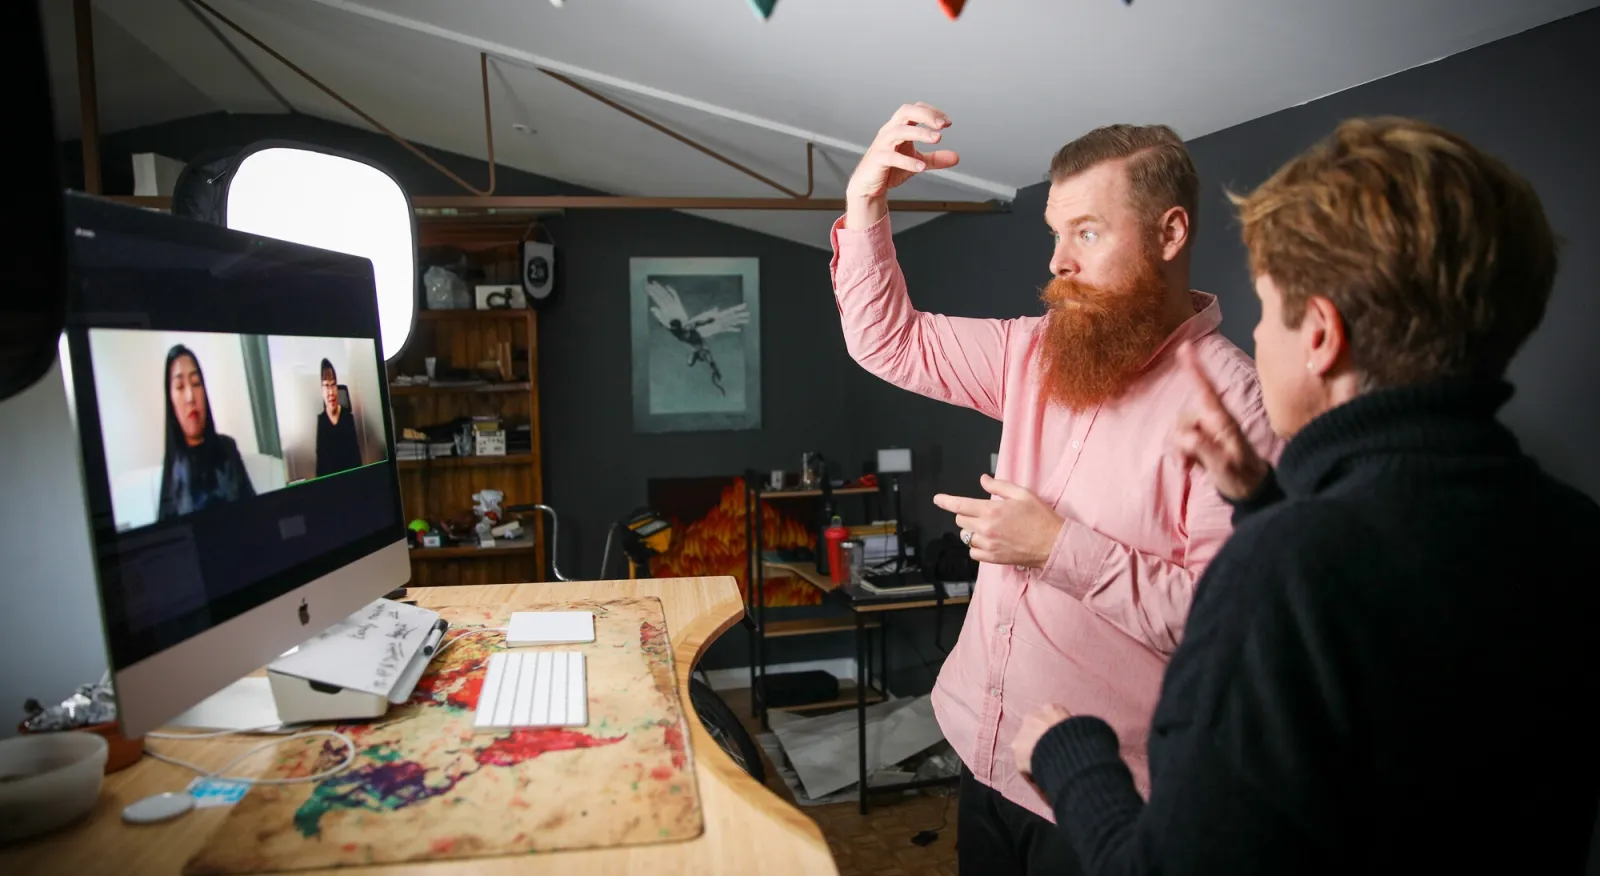 A man and a woman are signing in ASL to two women on a computer screen on Zoom. The man has red hair and a thick red beard and the camera can see his face. The woman is facing away from the camera, looking at her colleague.